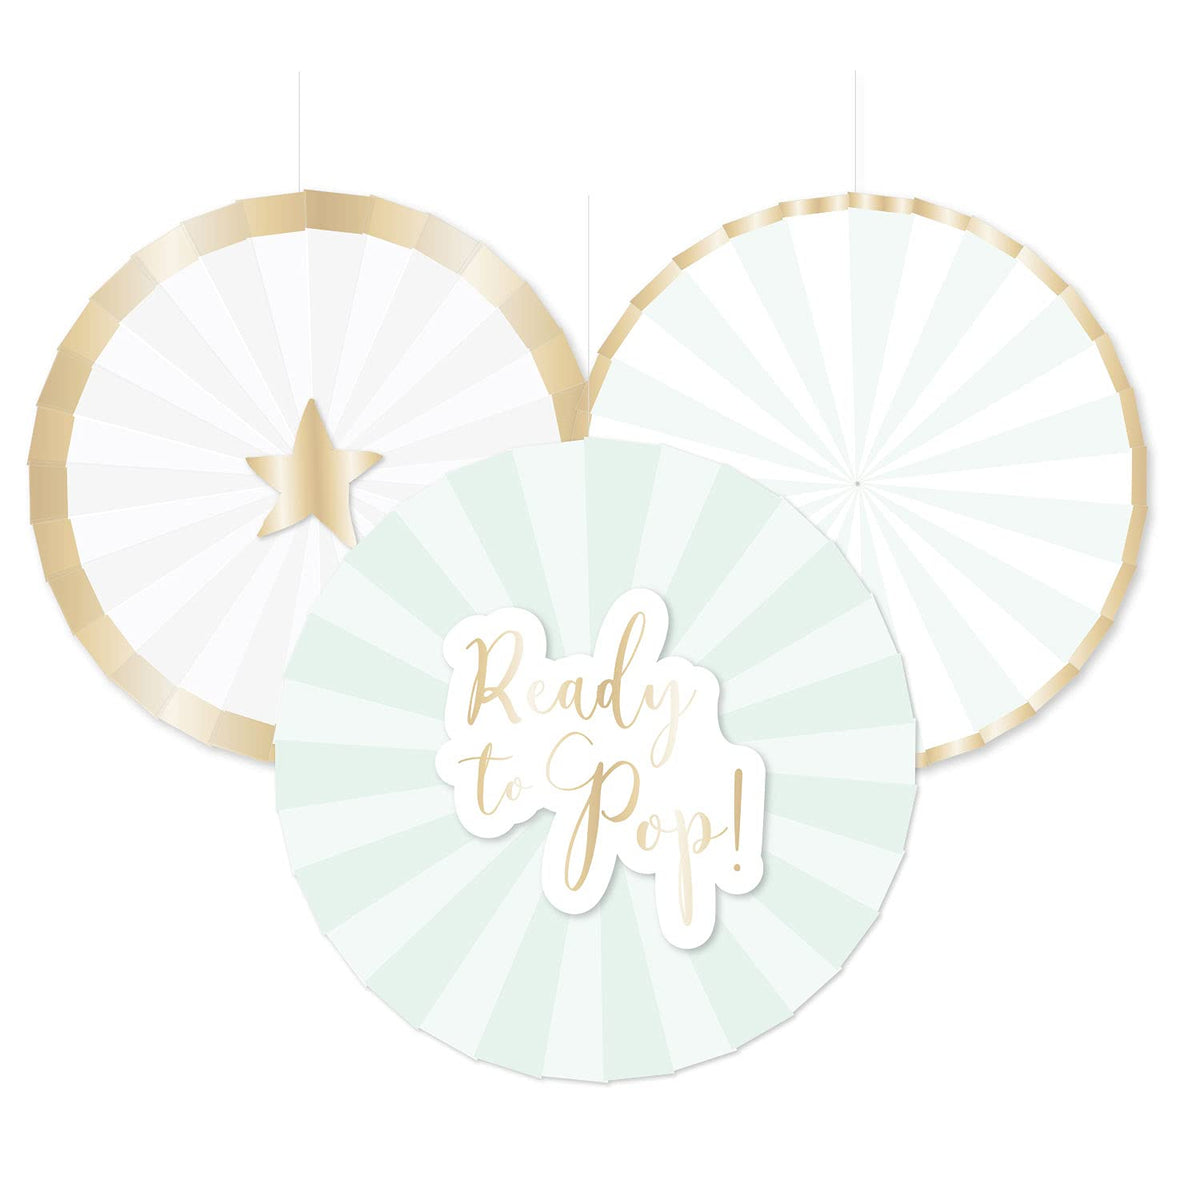 Amscan 9910290 - Ready to Pop Baby Shower Paper Fans Kit - 3 Pack